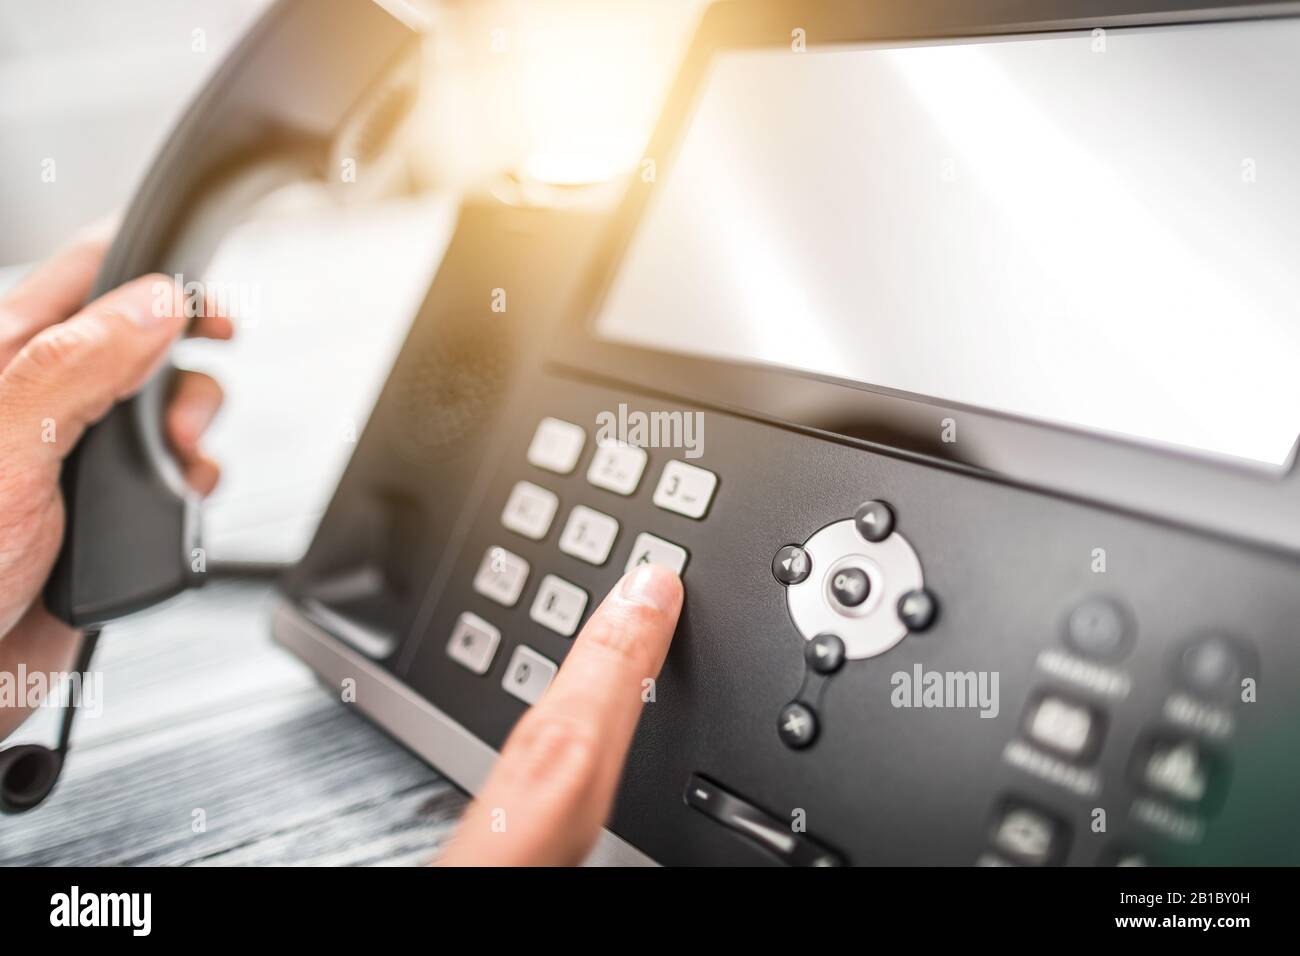 Communication support, call center and customer service help desk. Using a telephone keypad. Stock Photo